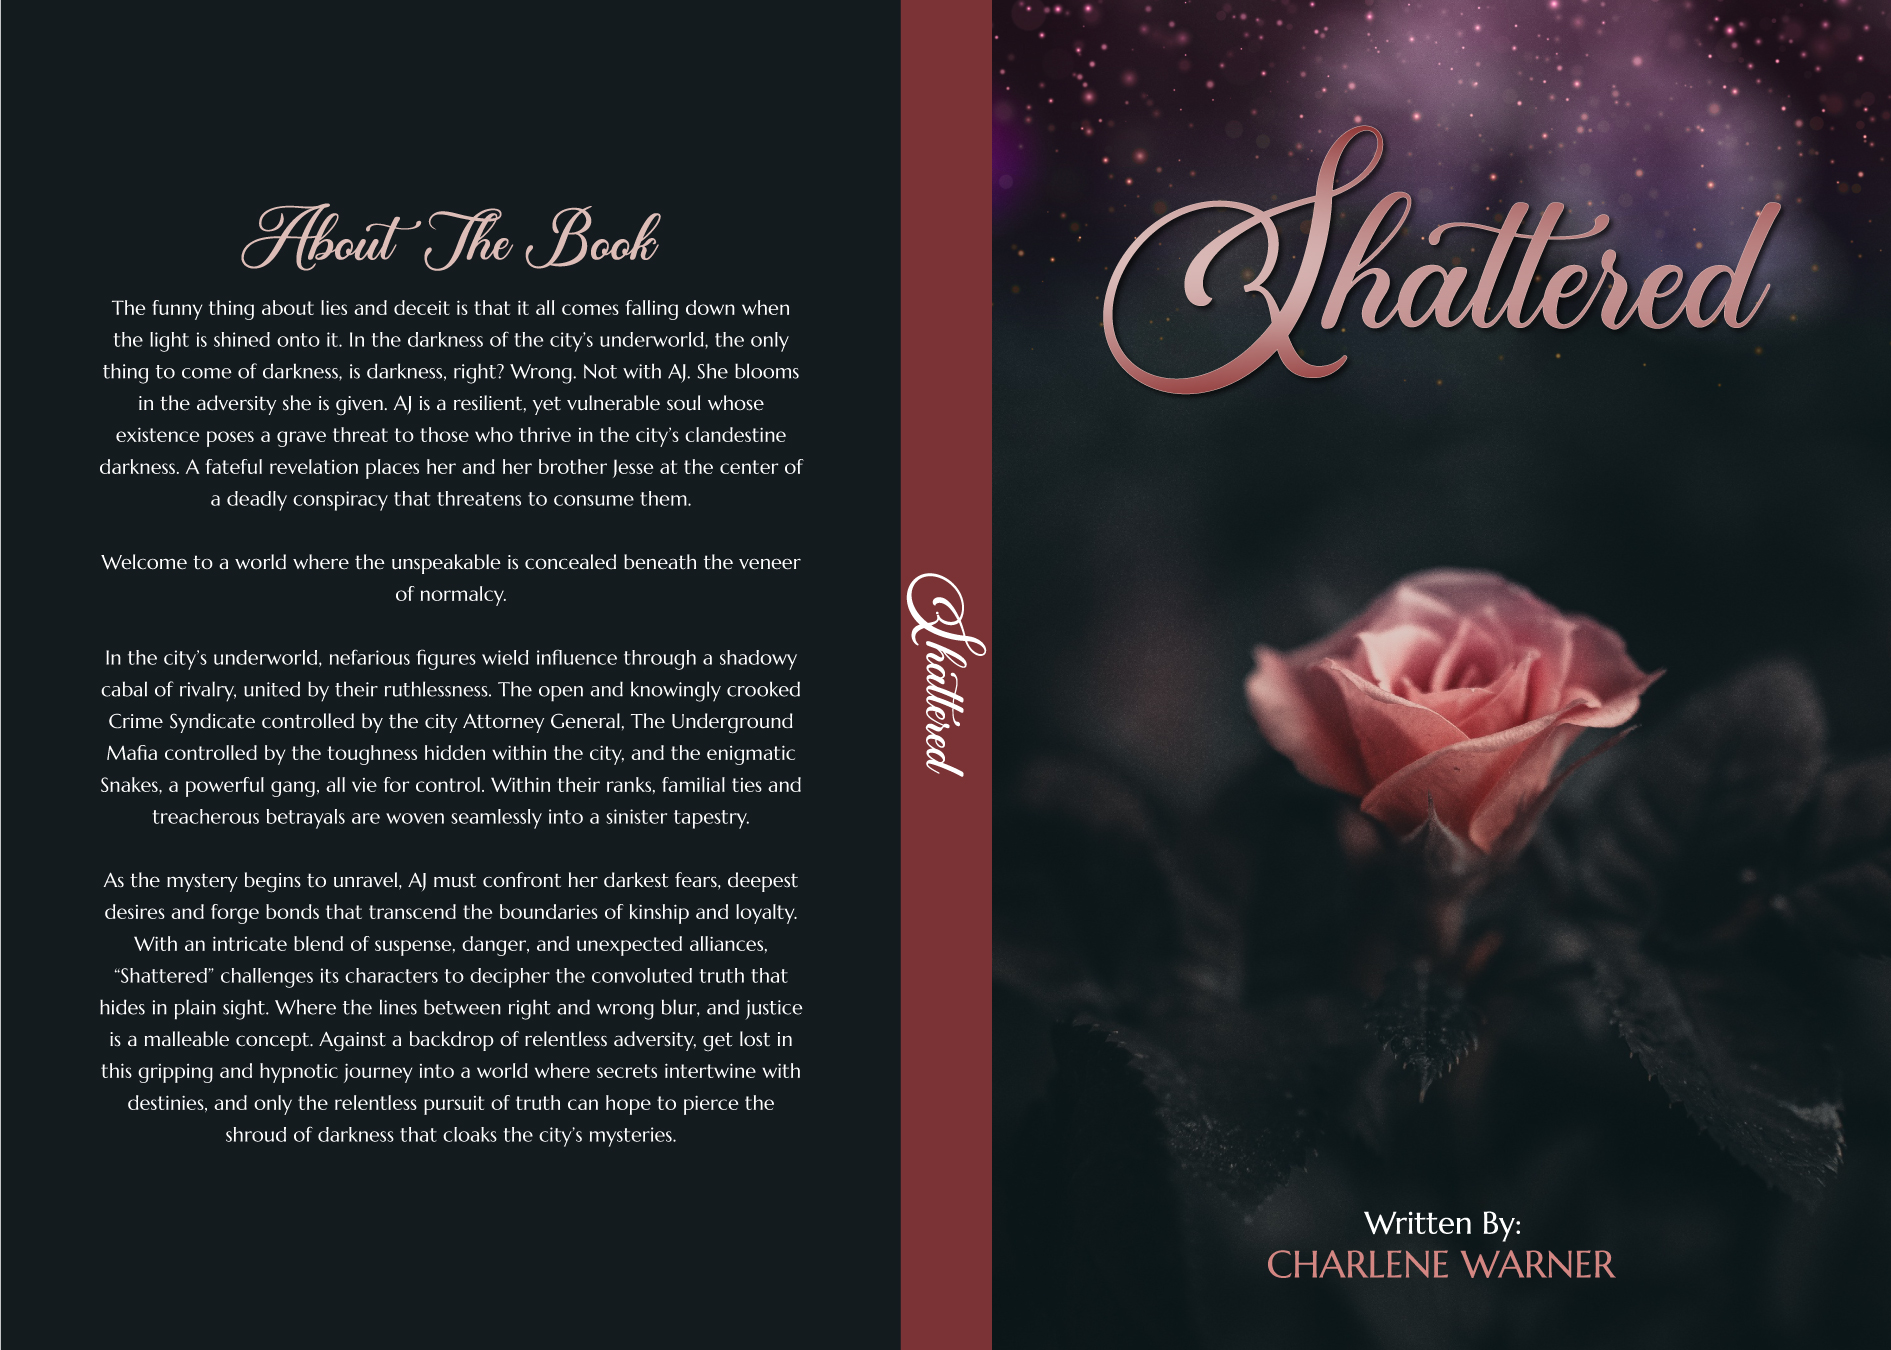 Author Charlene Warner Unveils Gripping Urban Thriller "Shattered" - A Tale of Deceit, Danger, and Unlikely Alliances